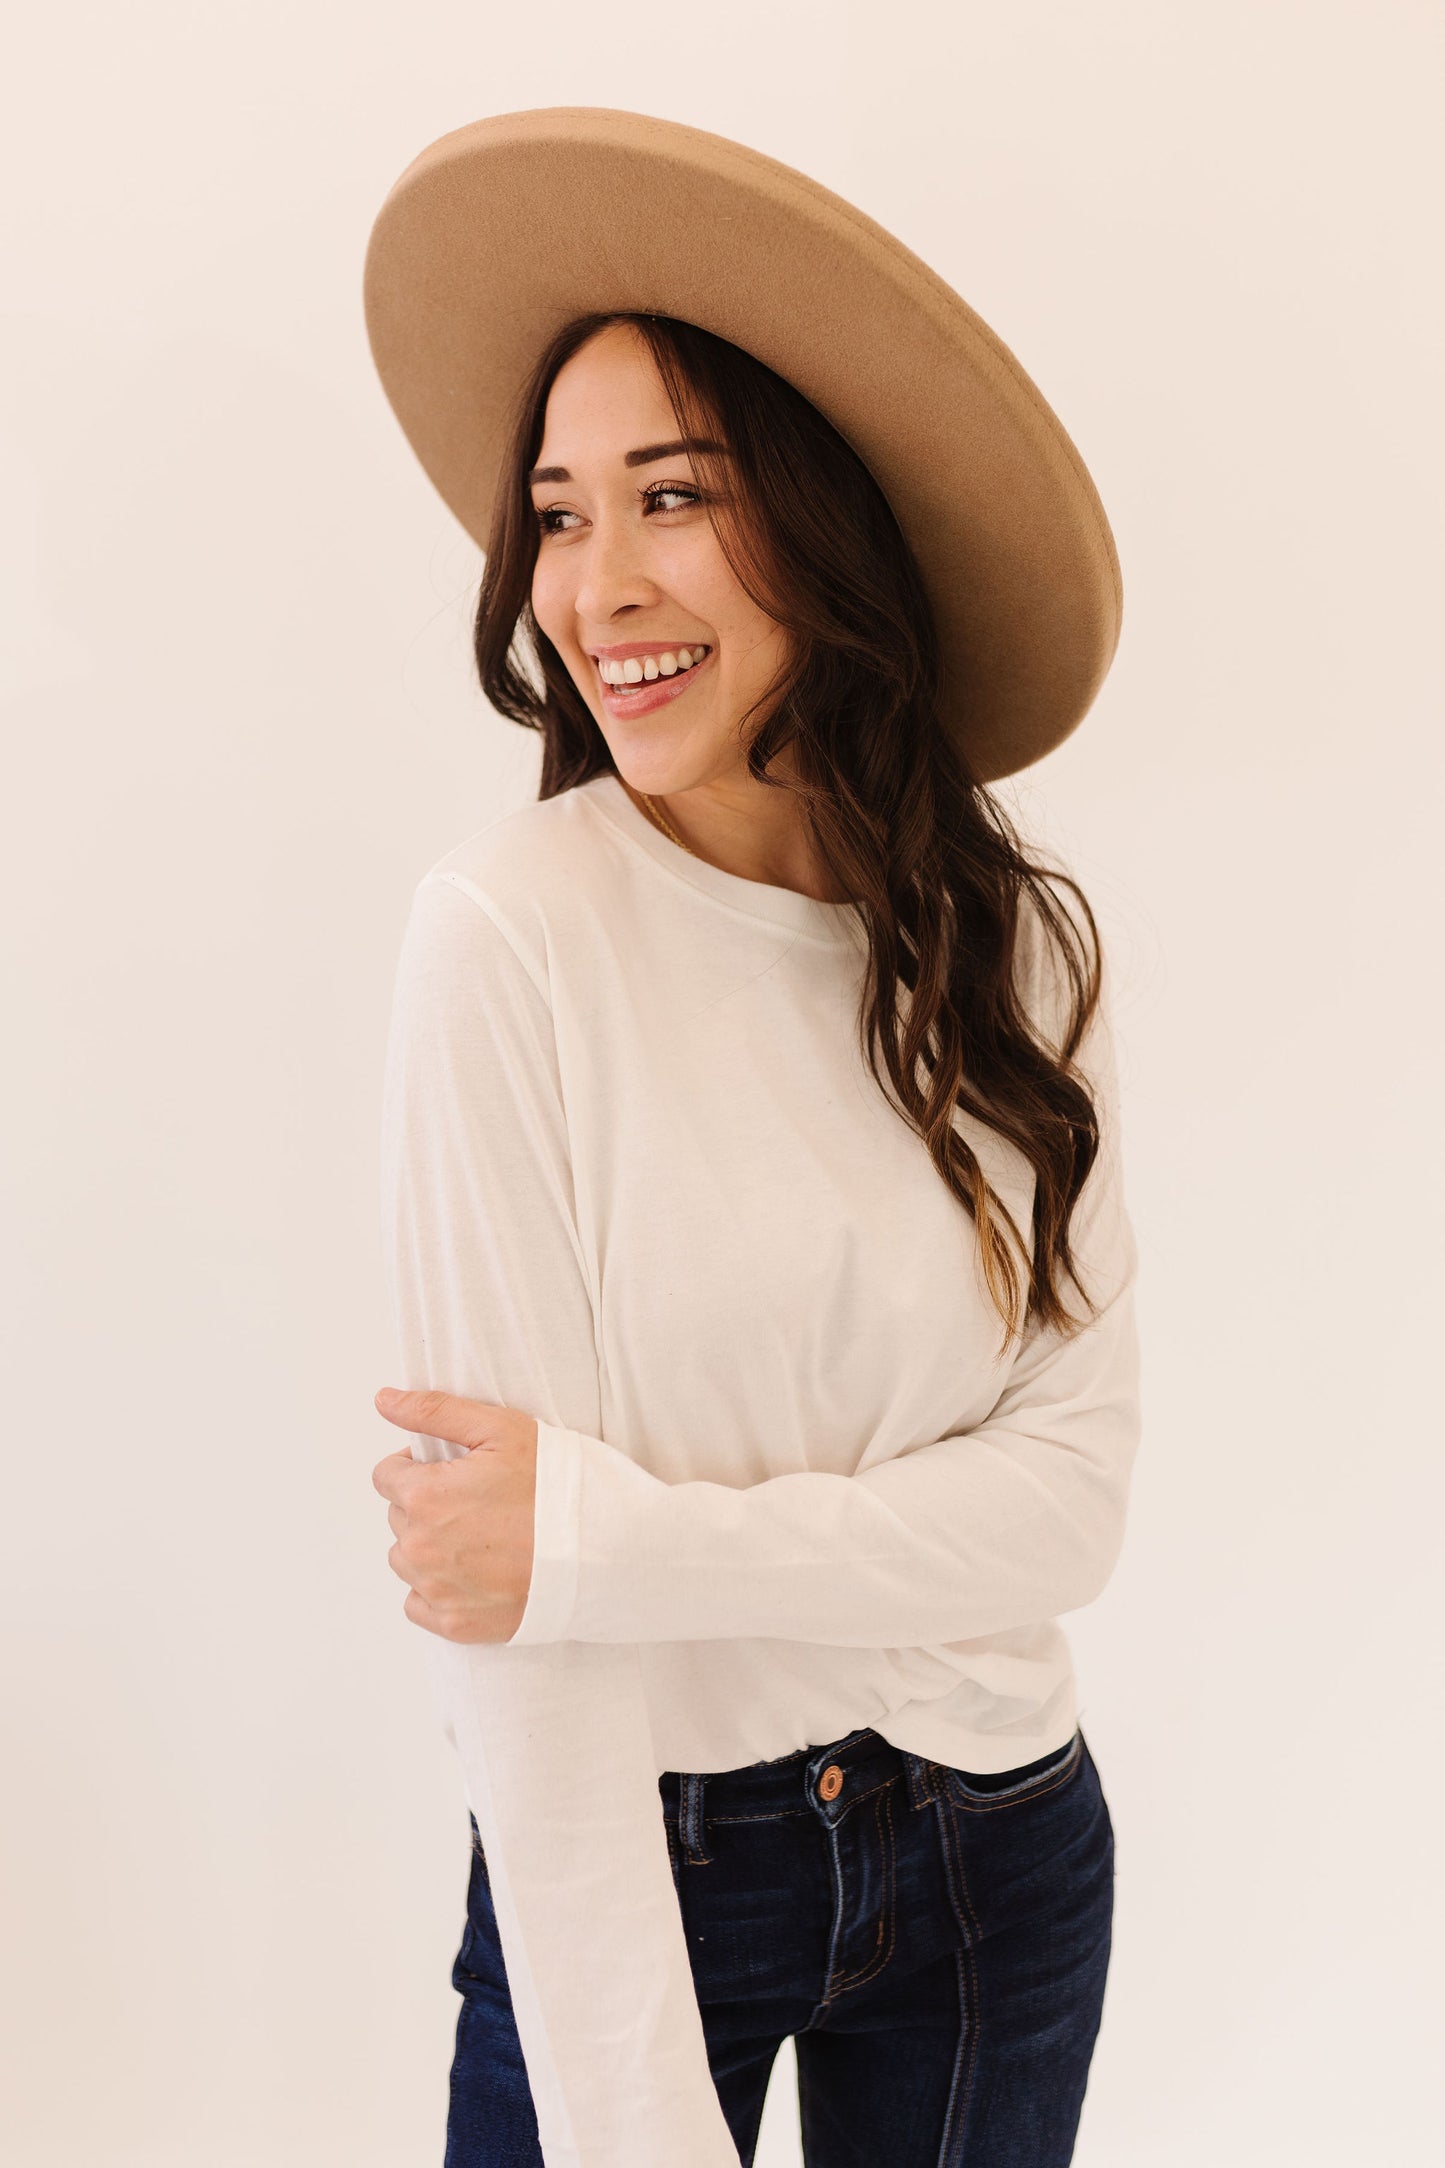 THE IRIS LONG SLEEVE TOP IN IVORY